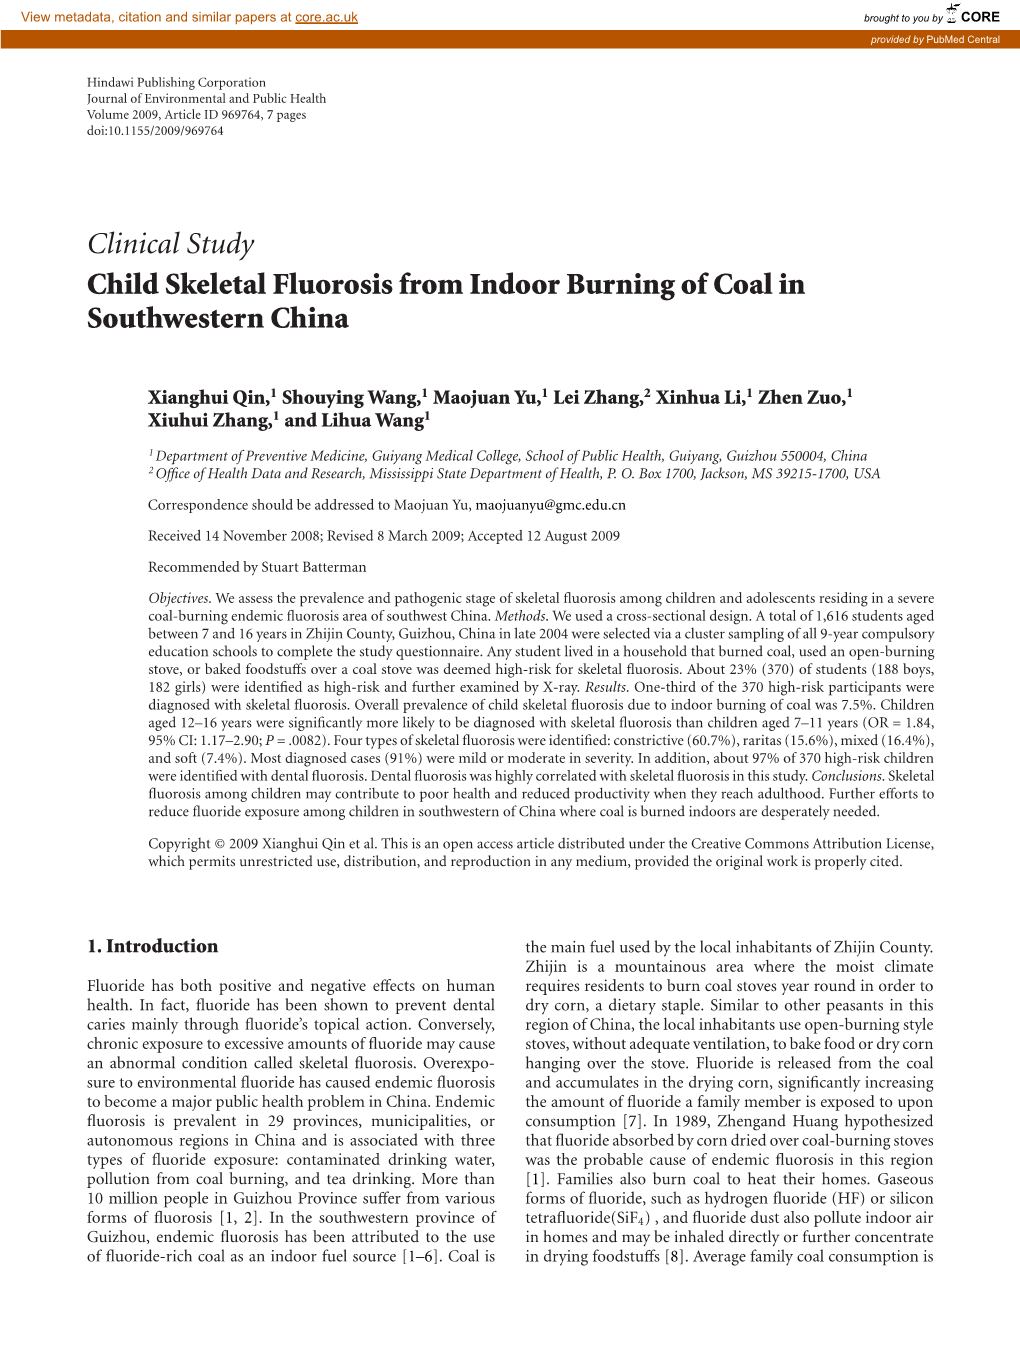 Clinical Study Child Skeletal Fluorosis from Indoor Burning of Coal in Southwestern China